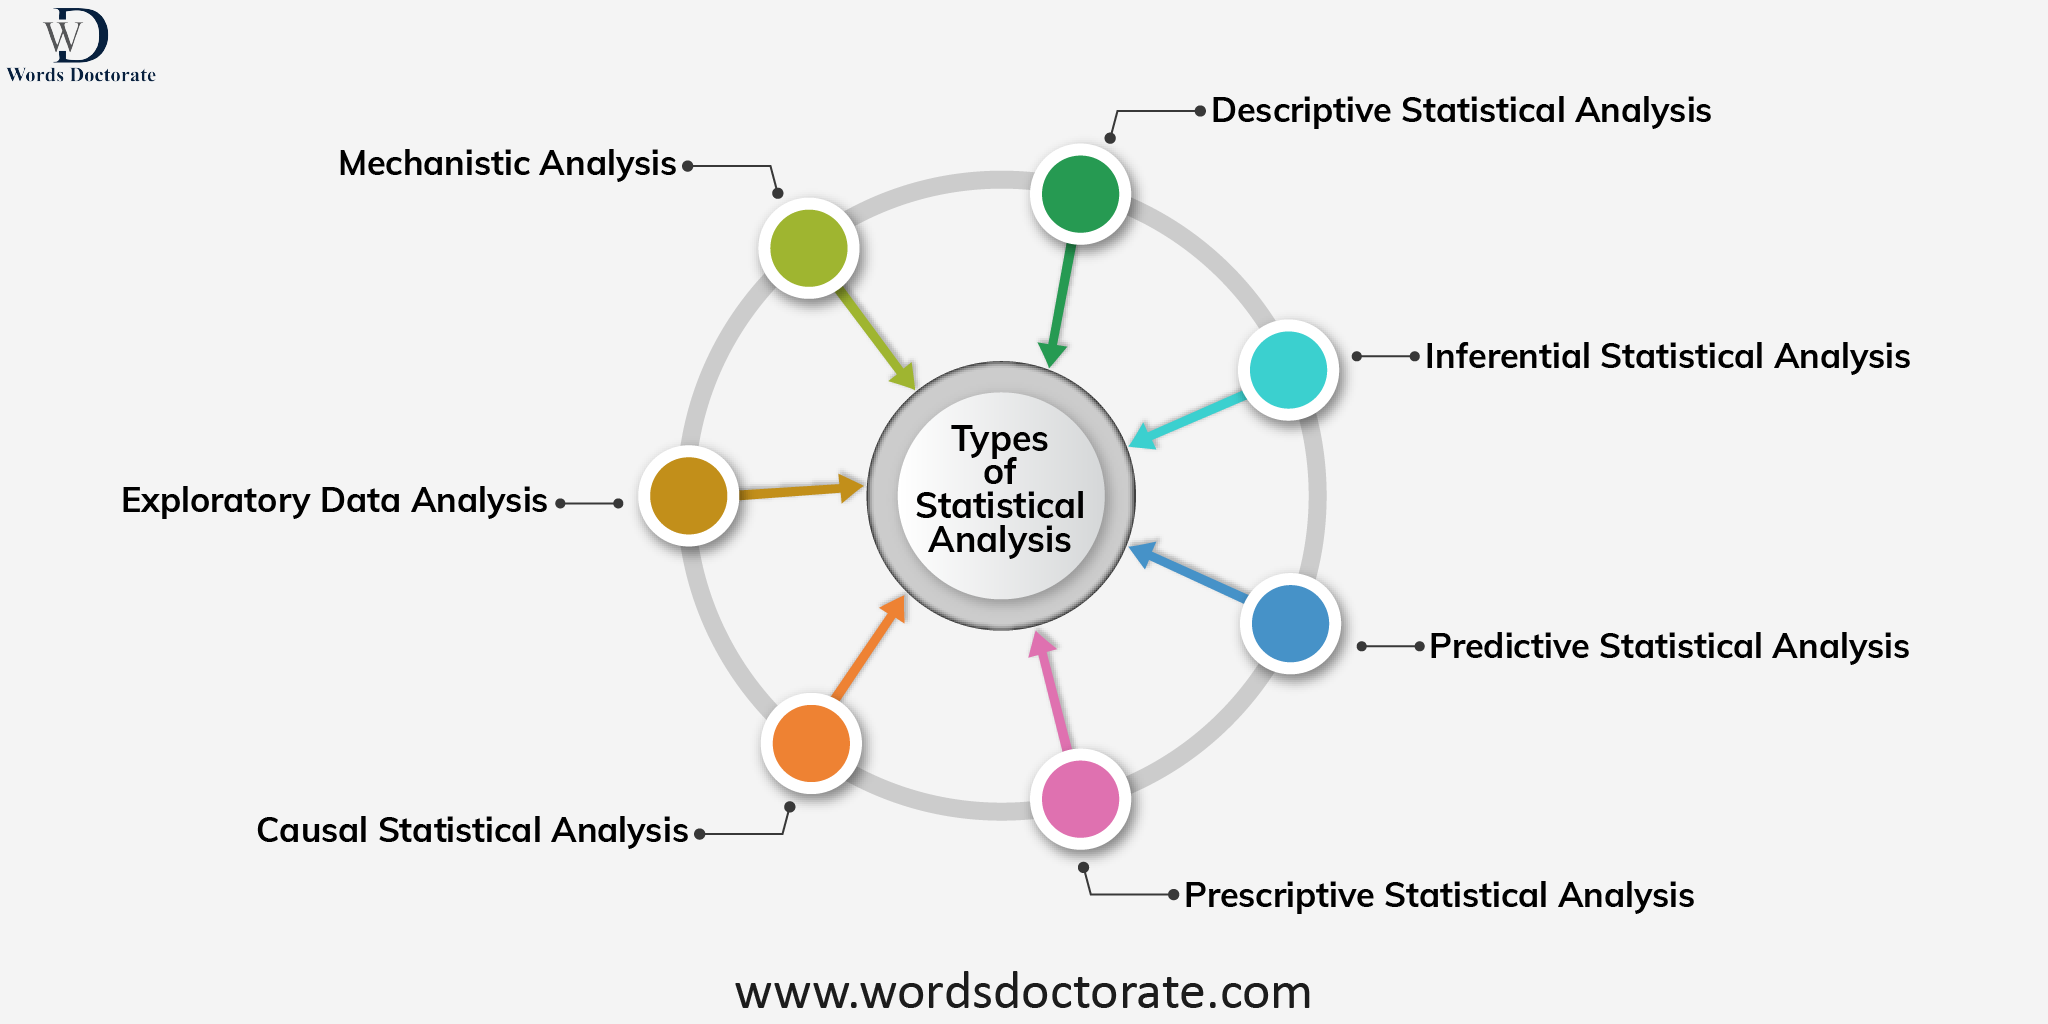 What Is Statistical Analysis? Definition, Types, and Jobs